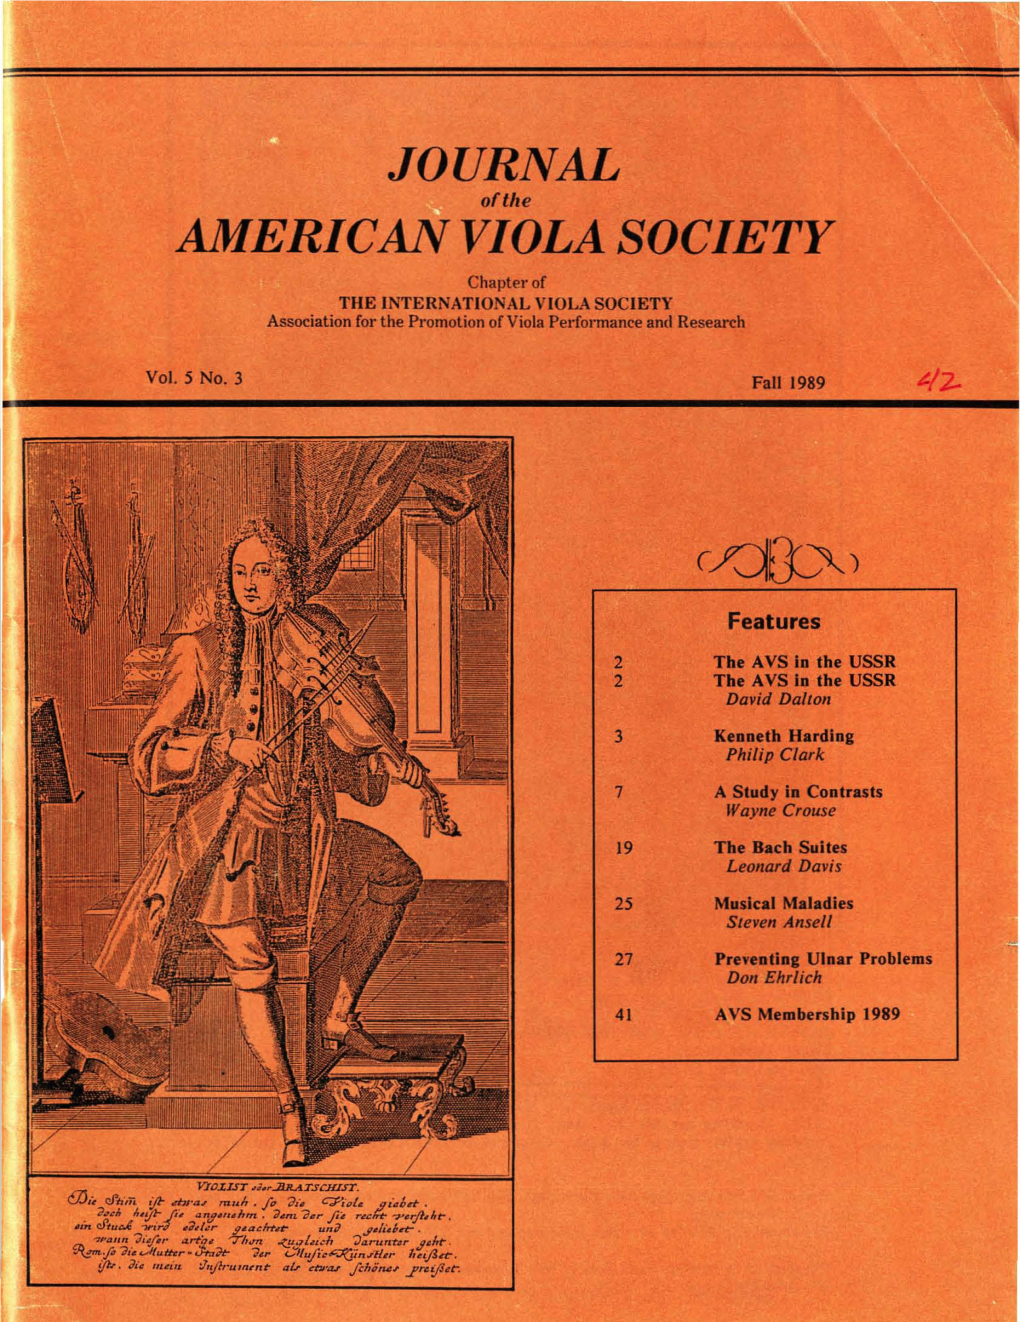 Journal of the American Viola Society Volume 5 No. 3, Fall 1989